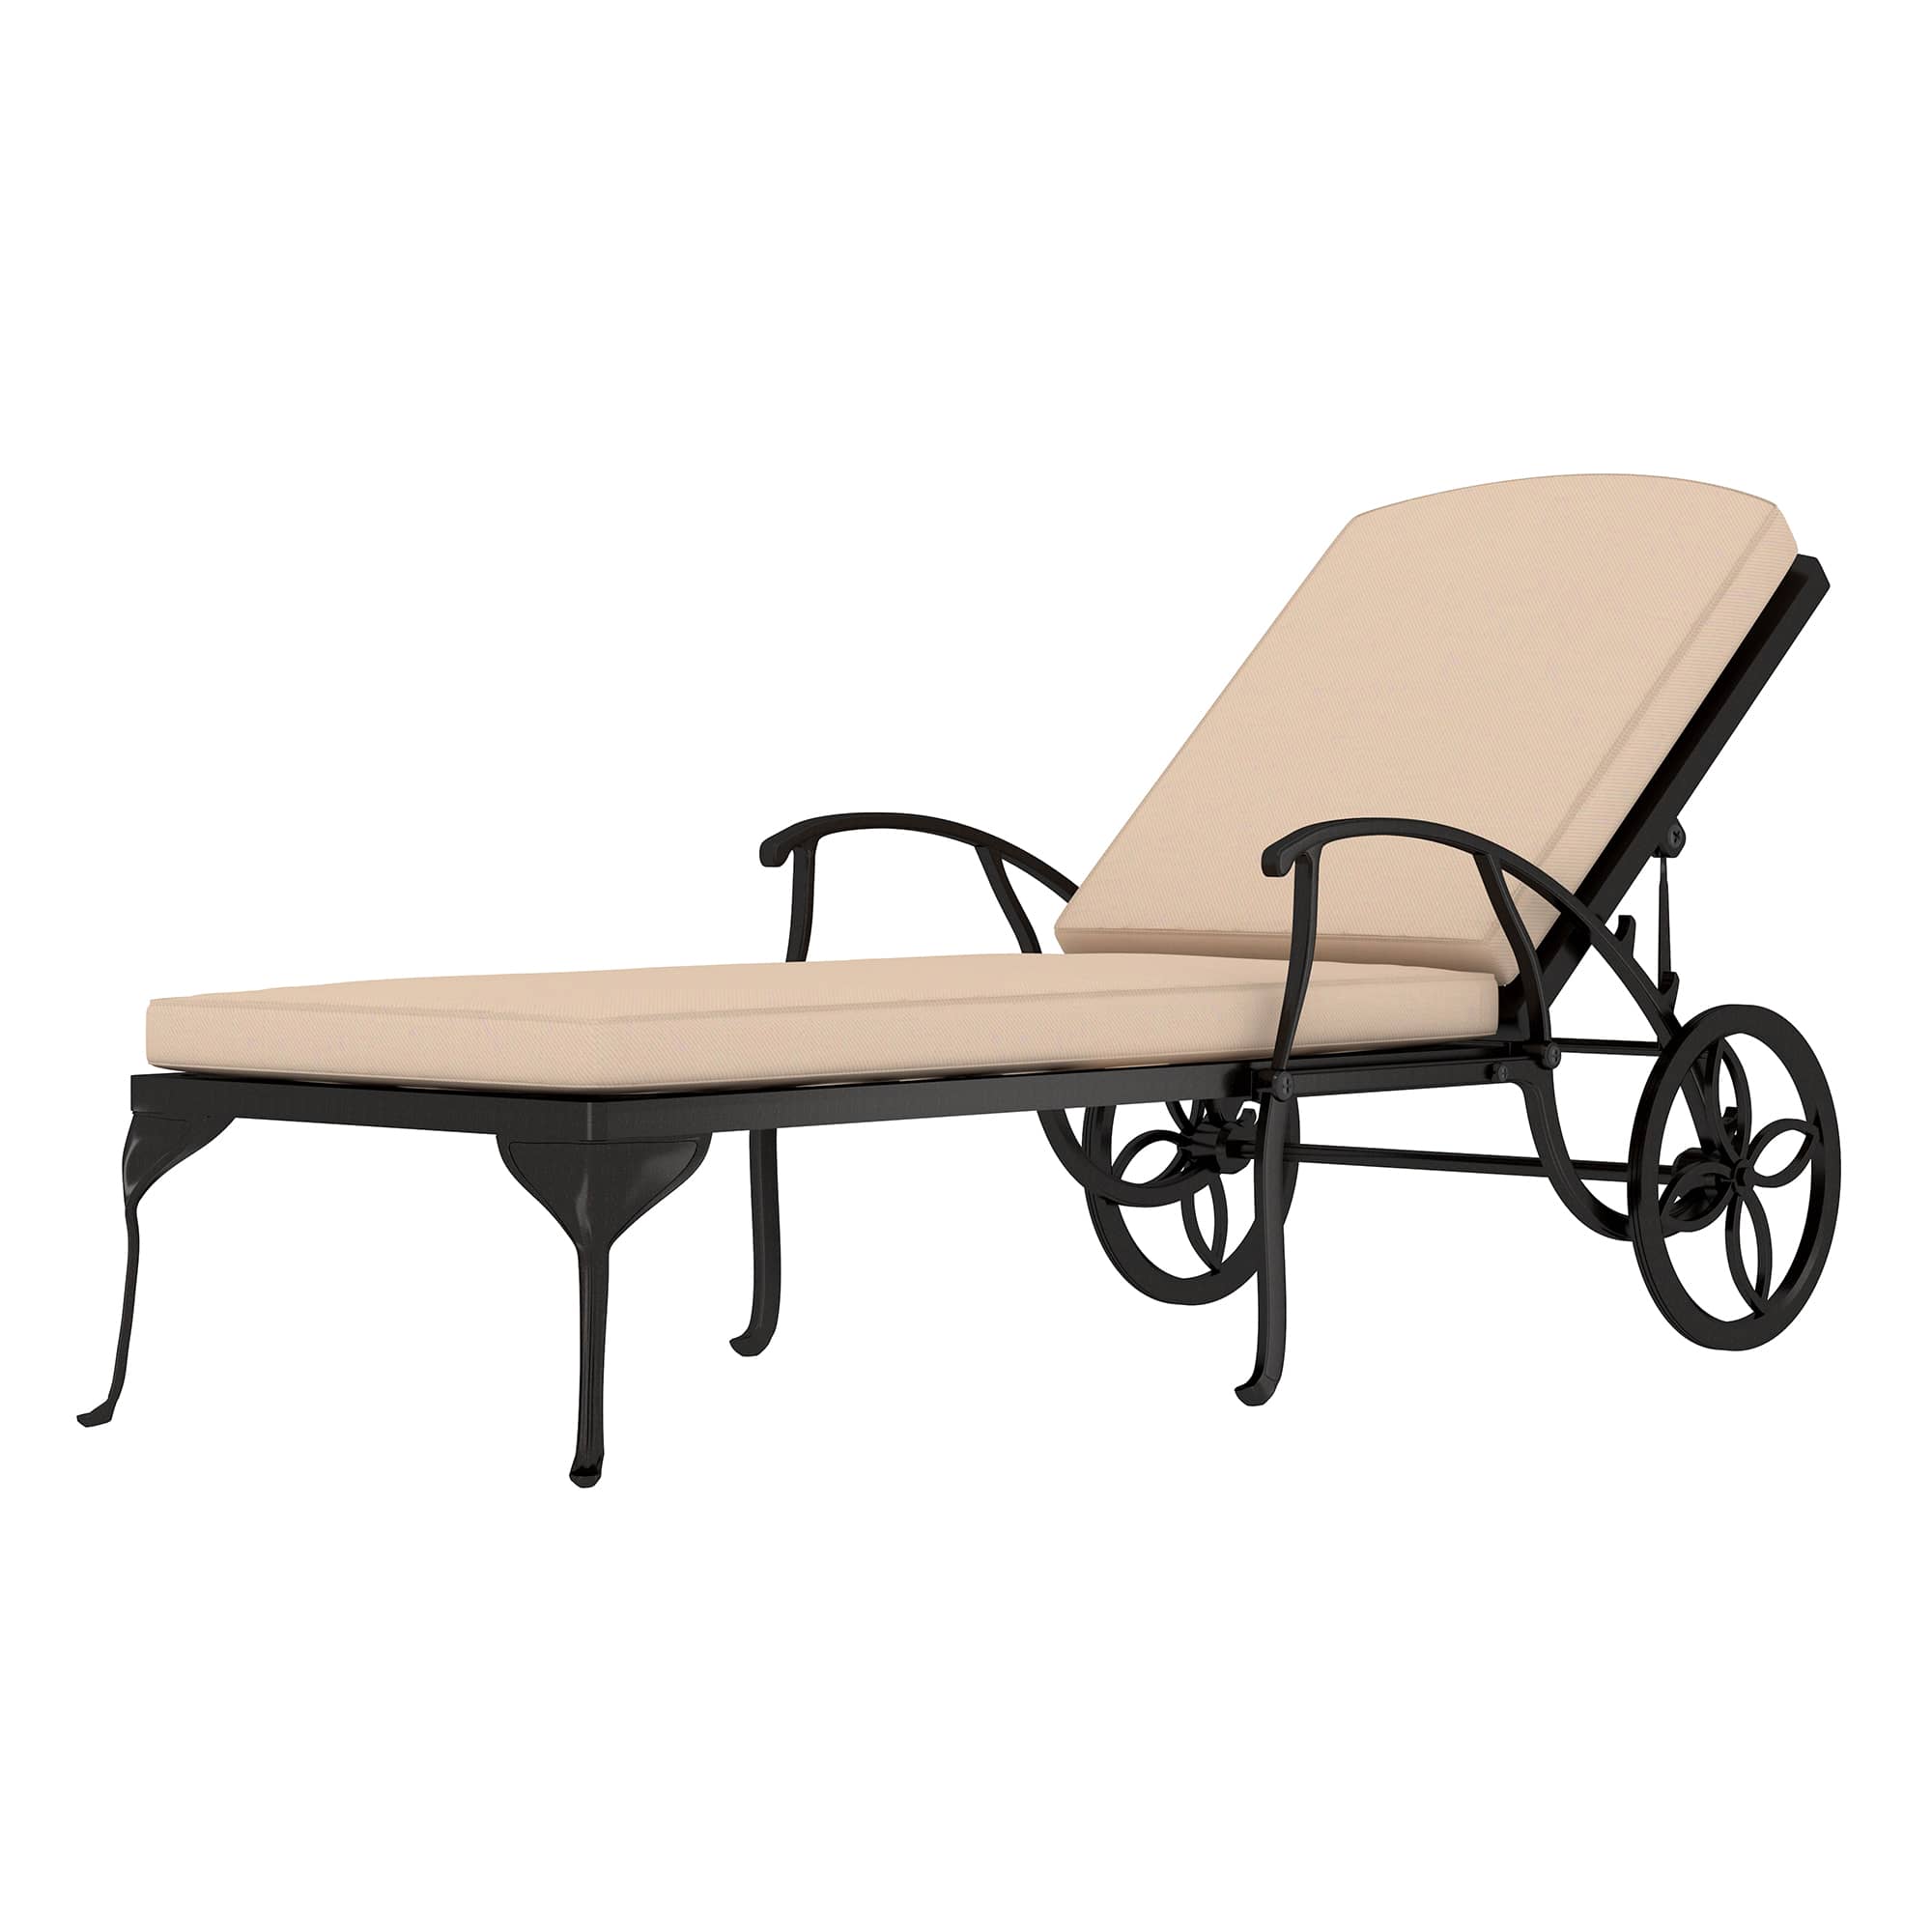 Antique Bronze Aluminum Reclining Outdoor Chaise Lounge with Wheels and Cushions in Red